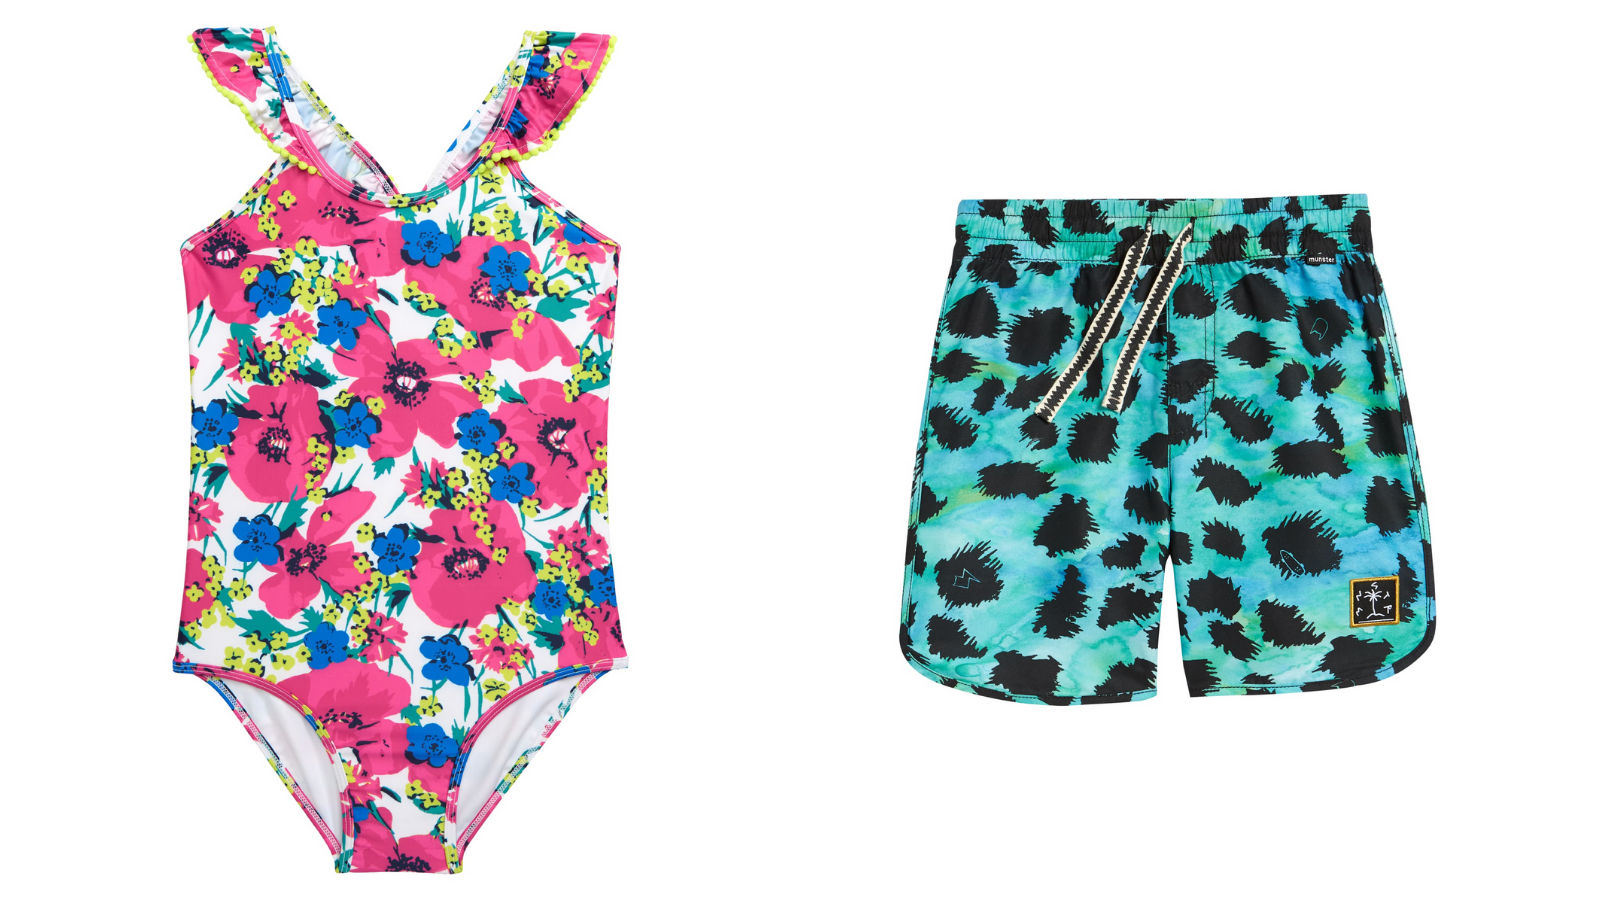 nordstrom baby bathing suits